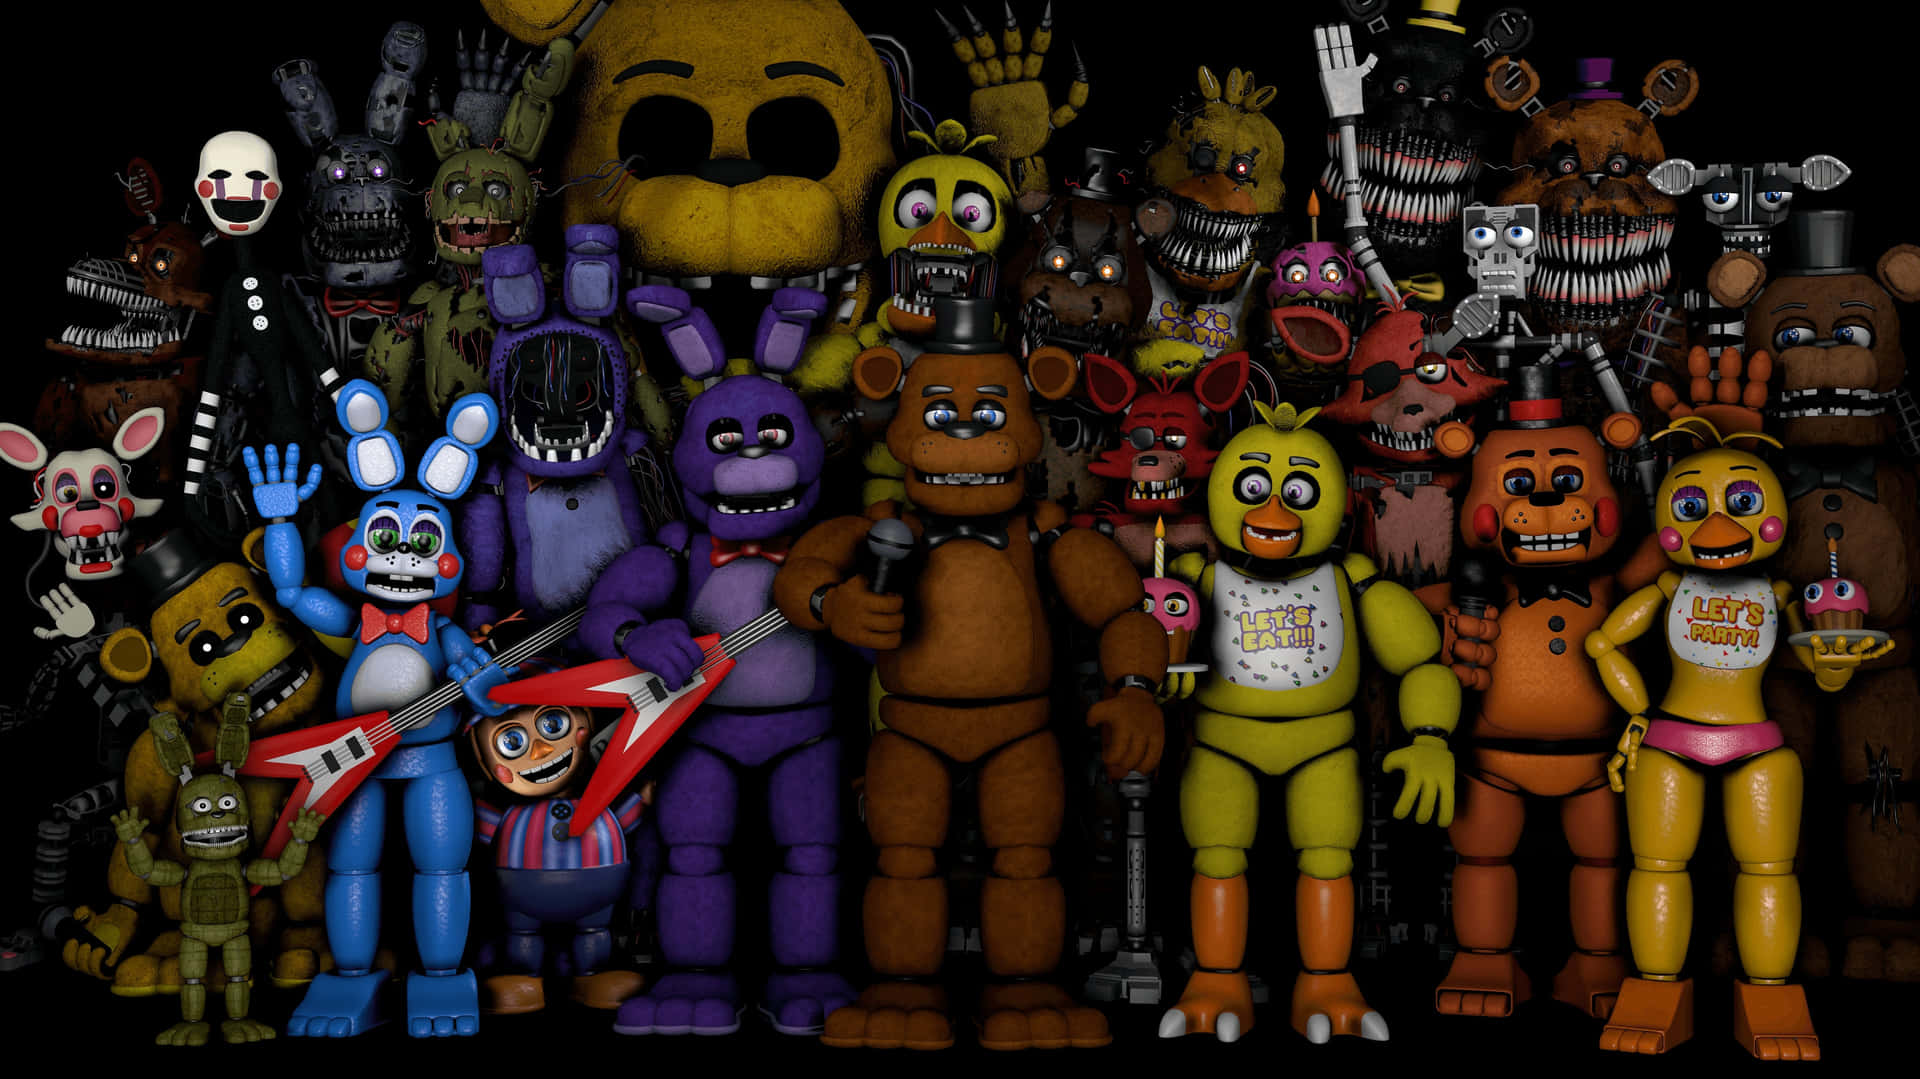 An impressive collection of animatronics characters displayed at a workshop. Wallpaper